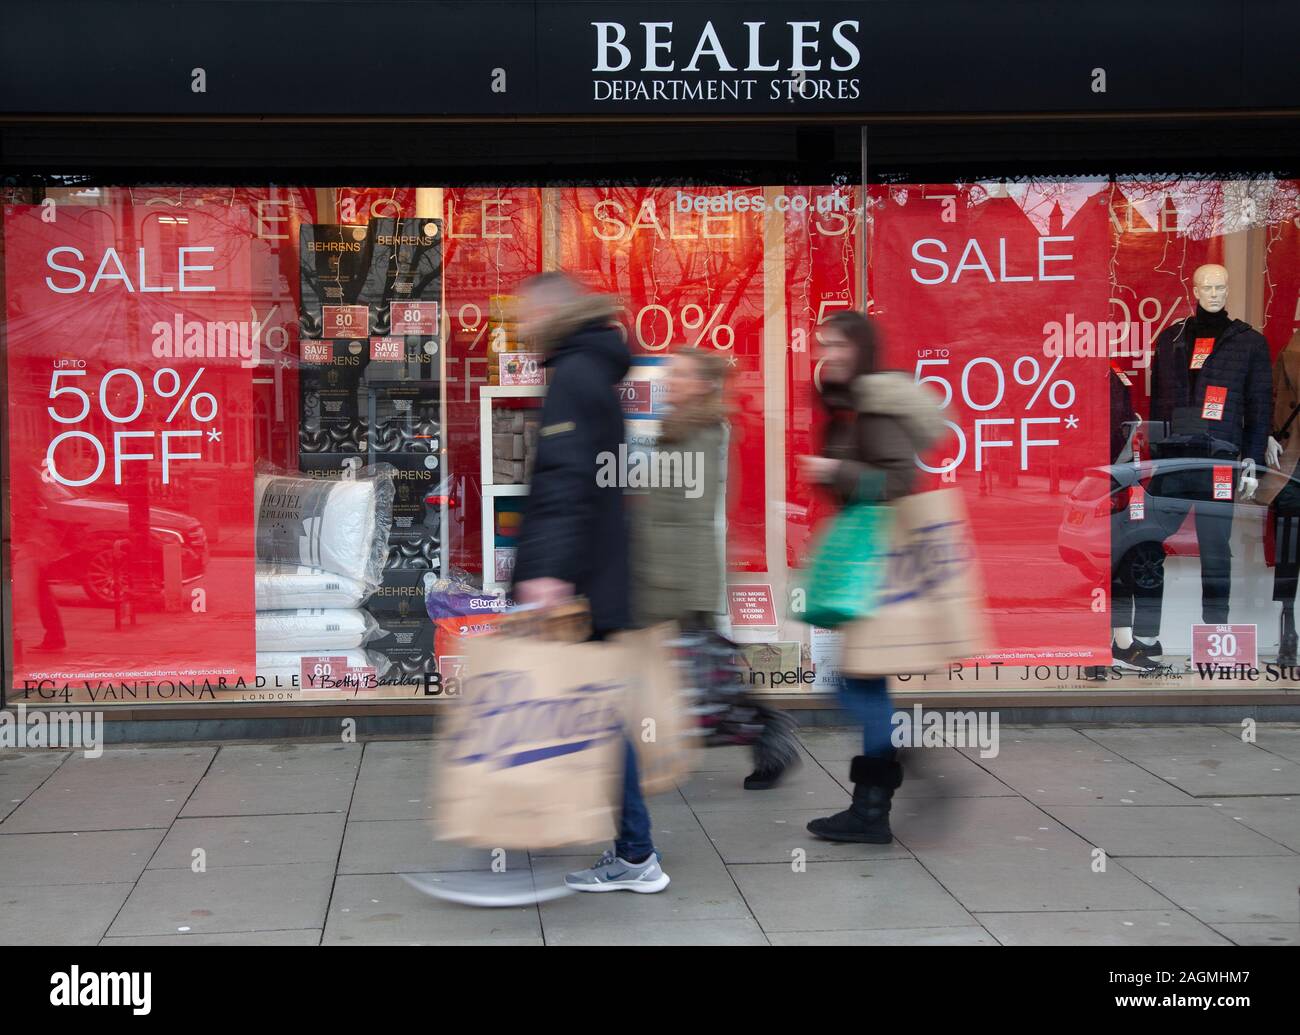 Friday Frenzy in Southport, Merseyside. UK Weather 20th December, 2019. Beales formerly Broadbents and Boothroyds;  Busy shopping day in the Town Centre U.K. retailers have embraced the pre-christmas sale bonanza, with many customers left surprised by bargain discounts, enjoying a Xmas spend & carrying a number bags, gifts, presents and sale items. Credit: MediaWorldImages/AlamyLiveNews. Stock Photo